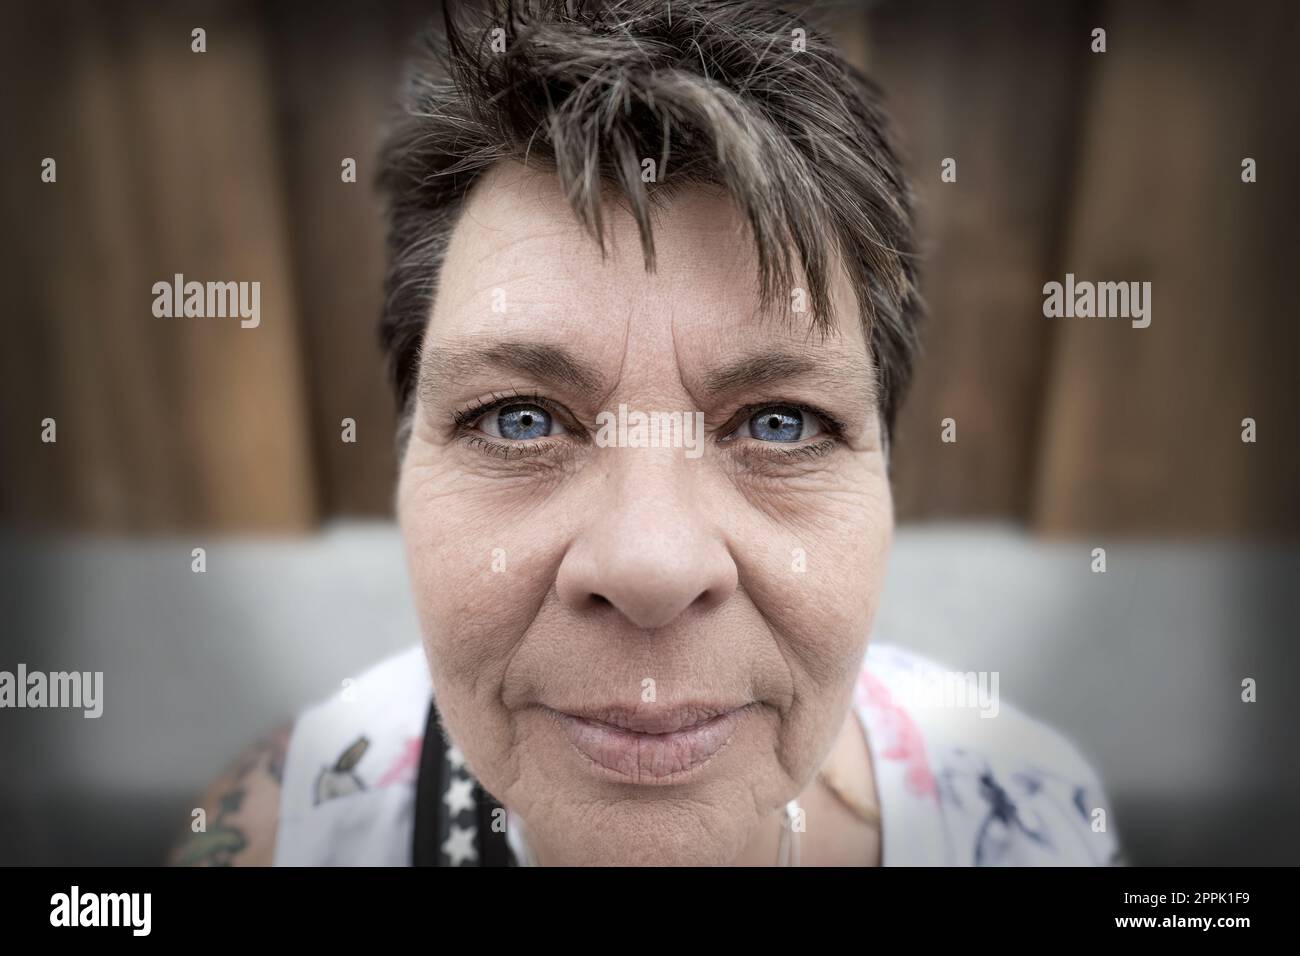 Mature lady, smiling, close-up, steel blue eyes, looking into camera. Stock Photo